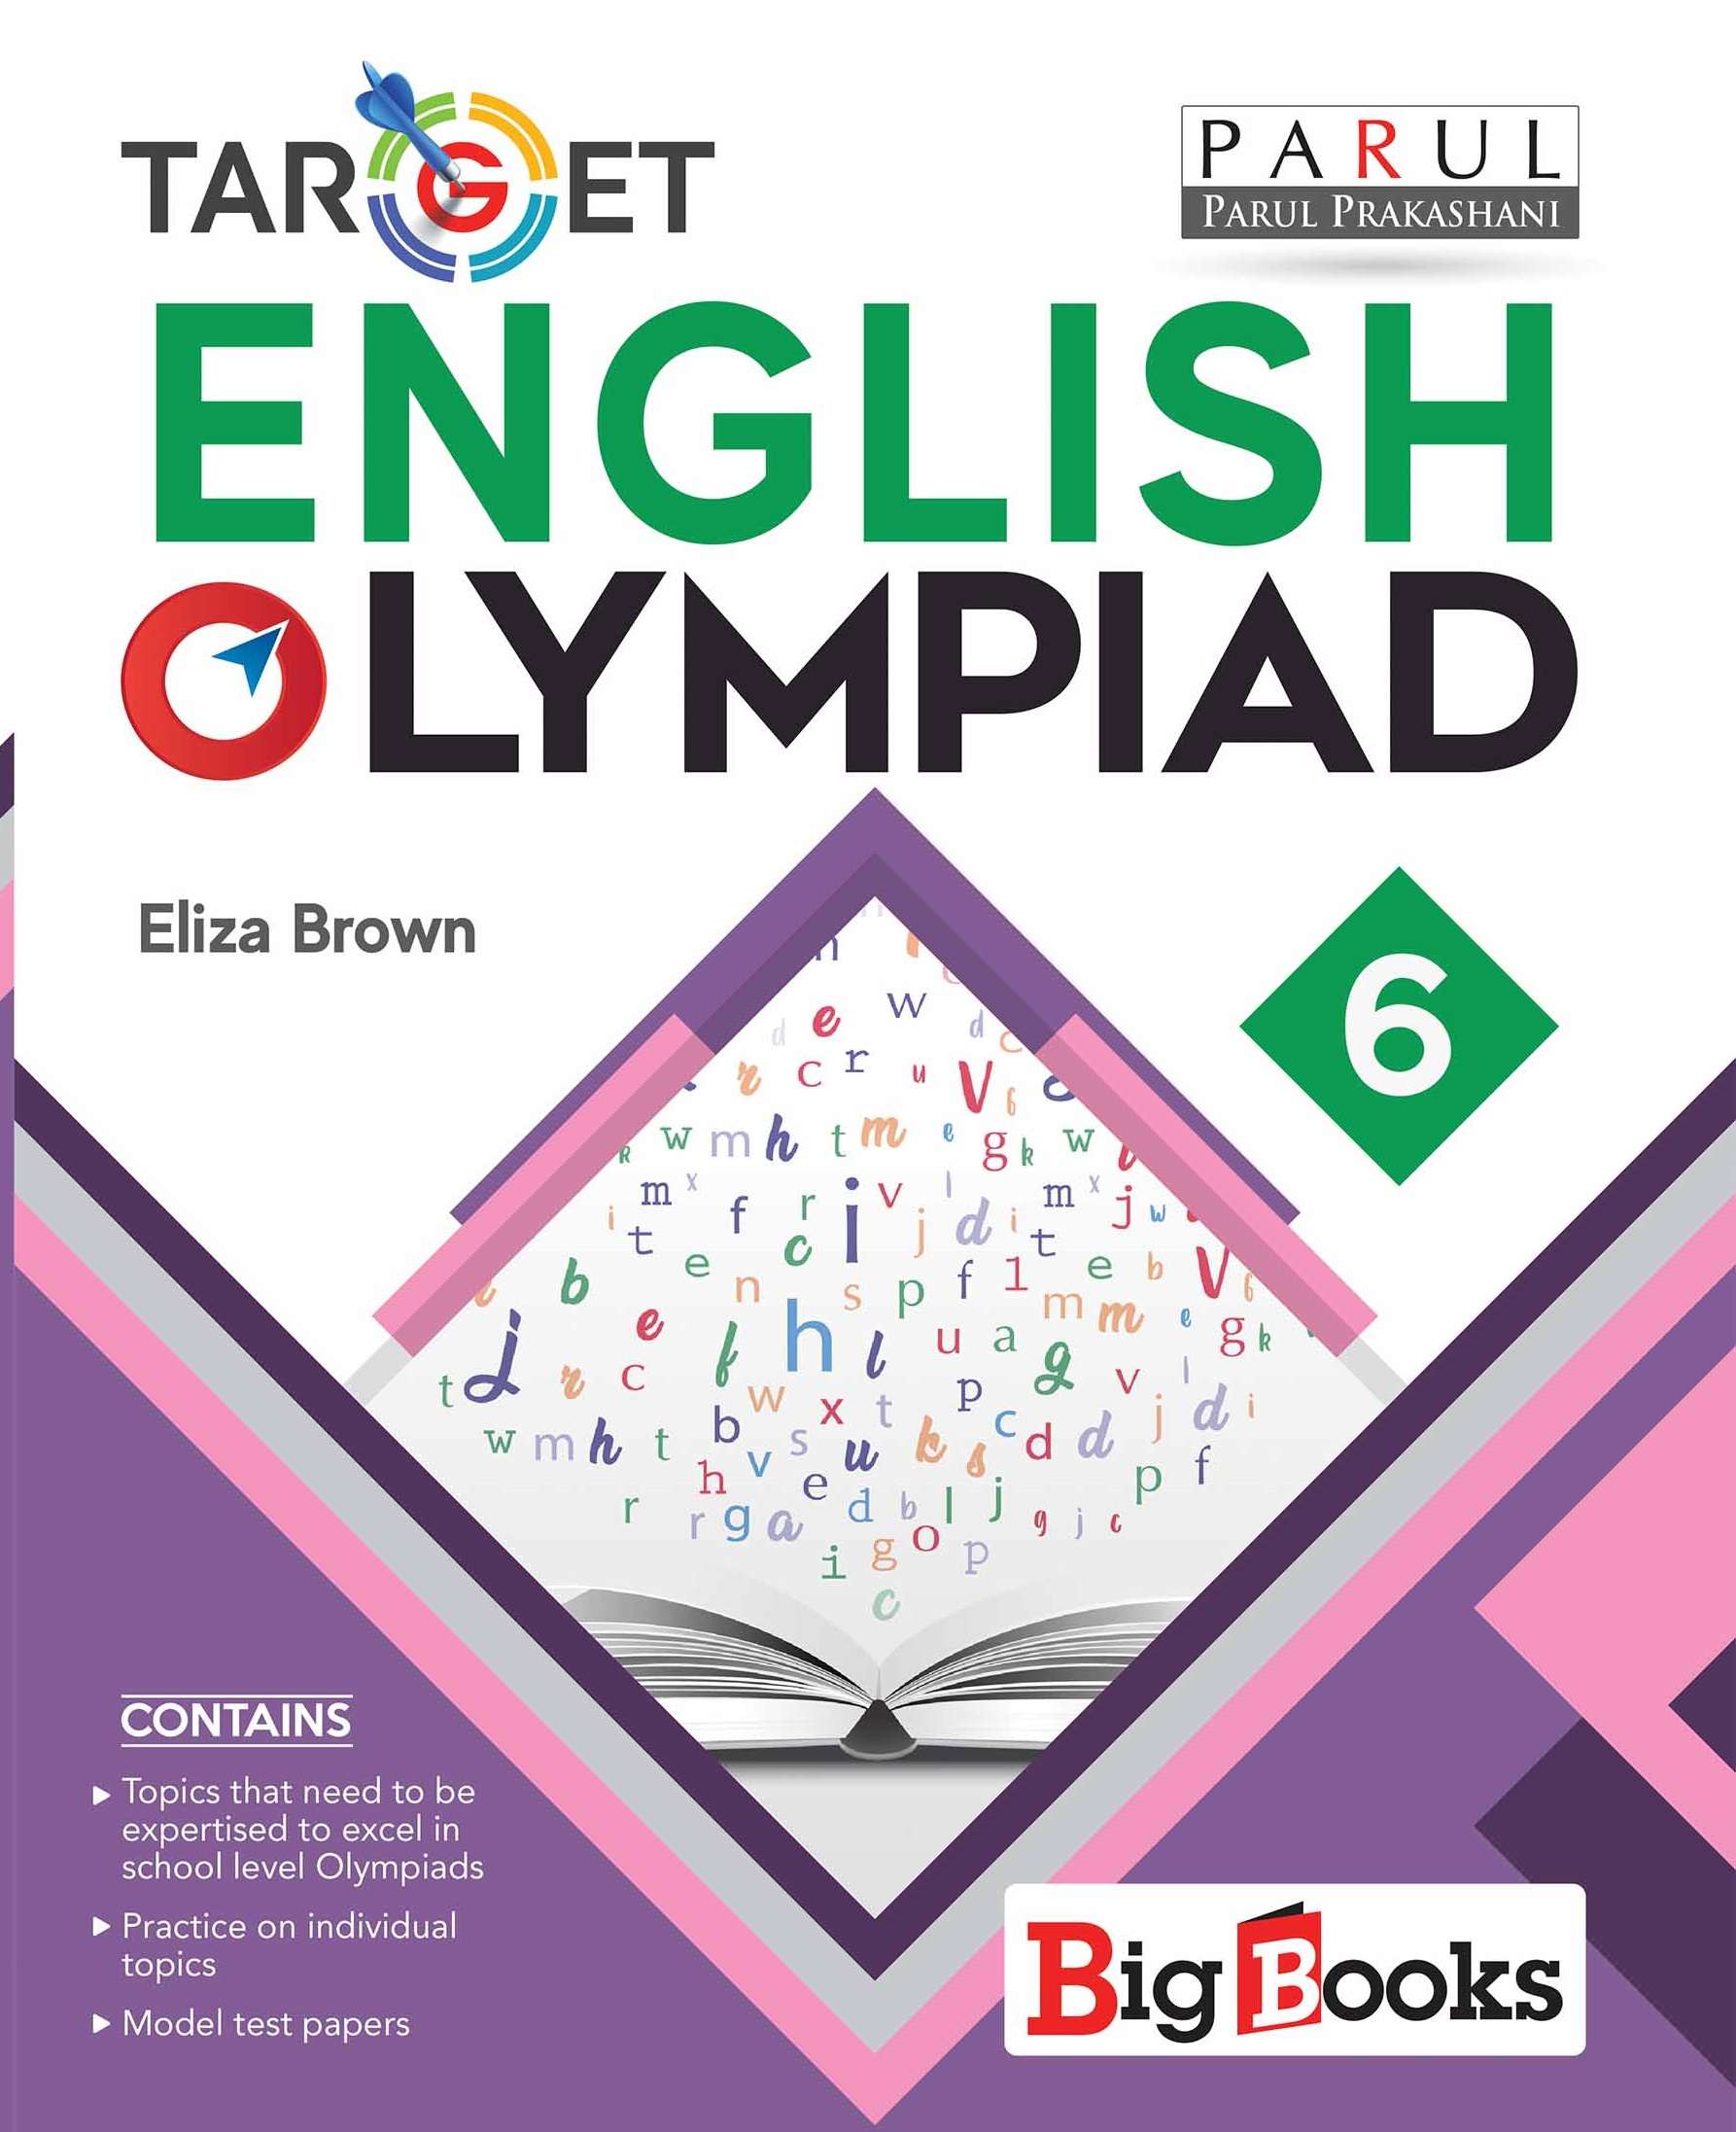 Buy English Olympiad book for 6